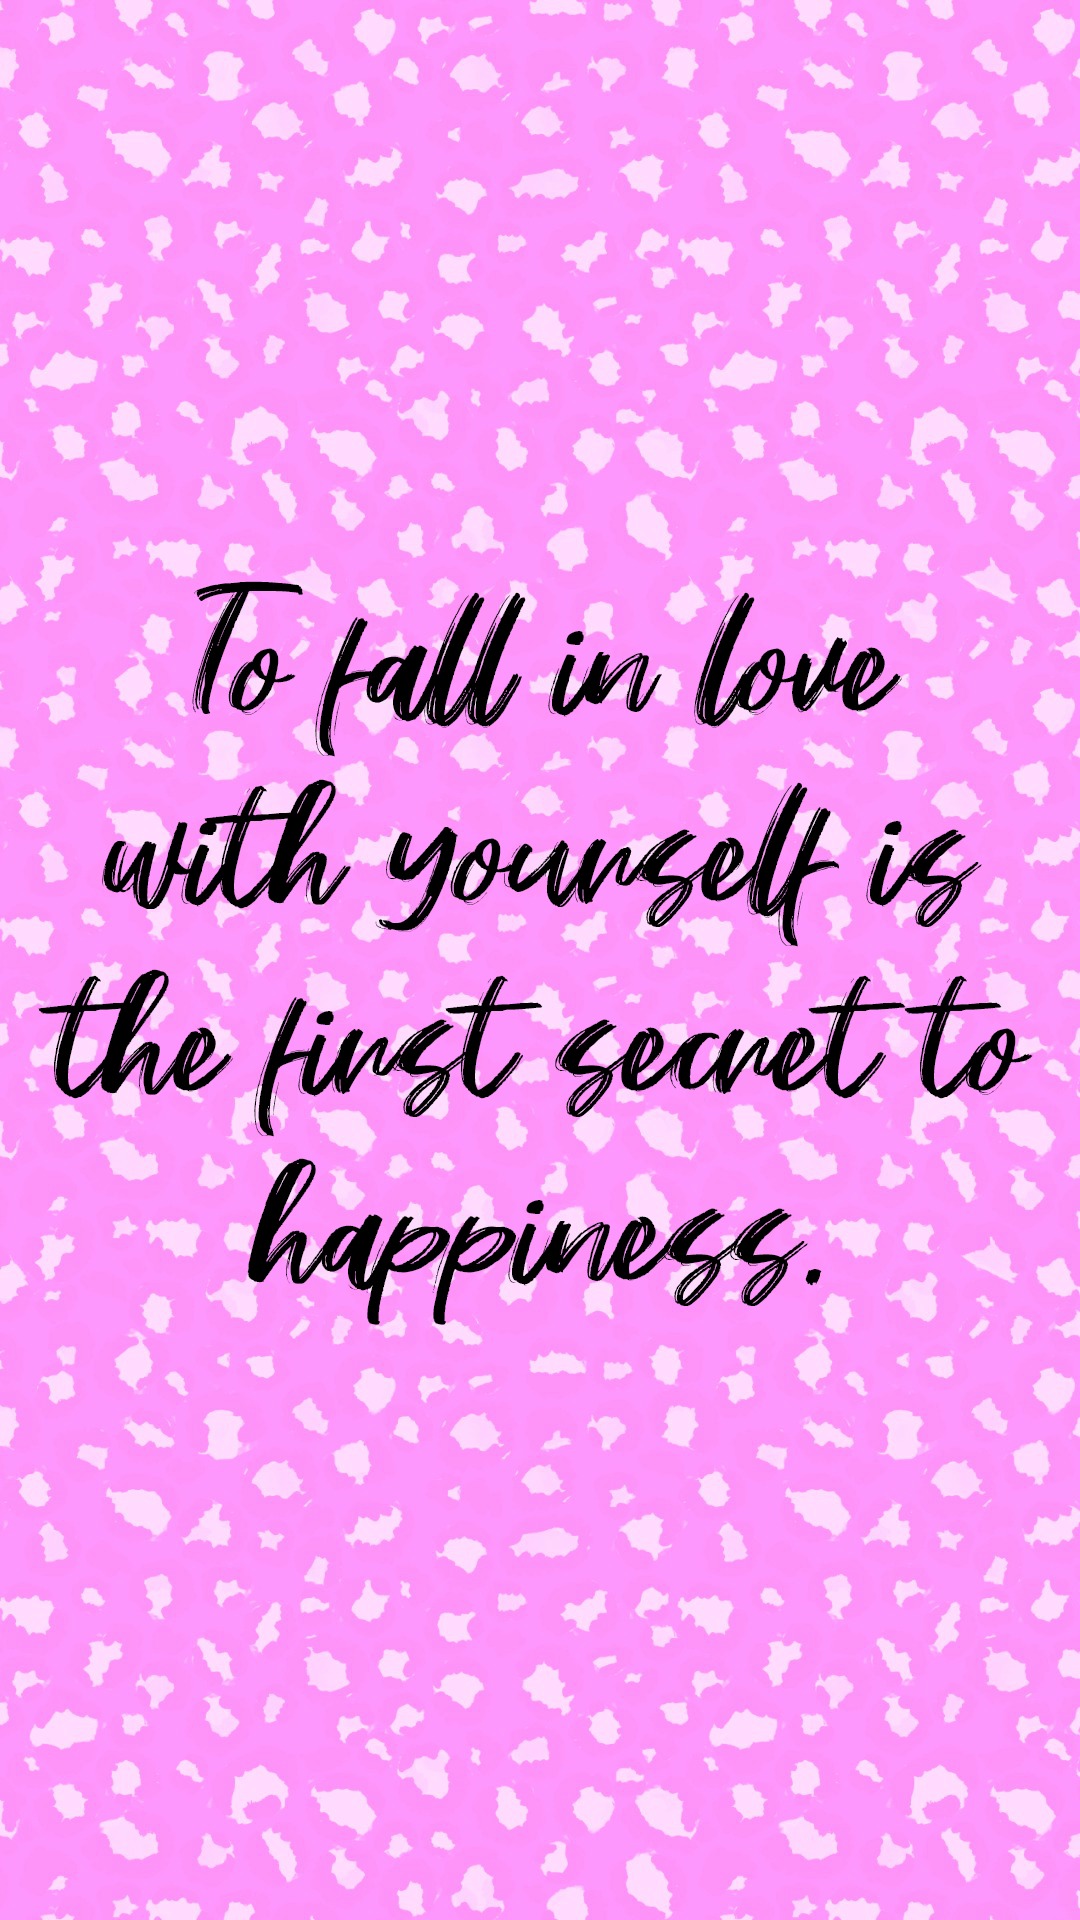 To Fall In Love With Yourself Is The Secret To Happiness - Illustration - HD Wallpaper 